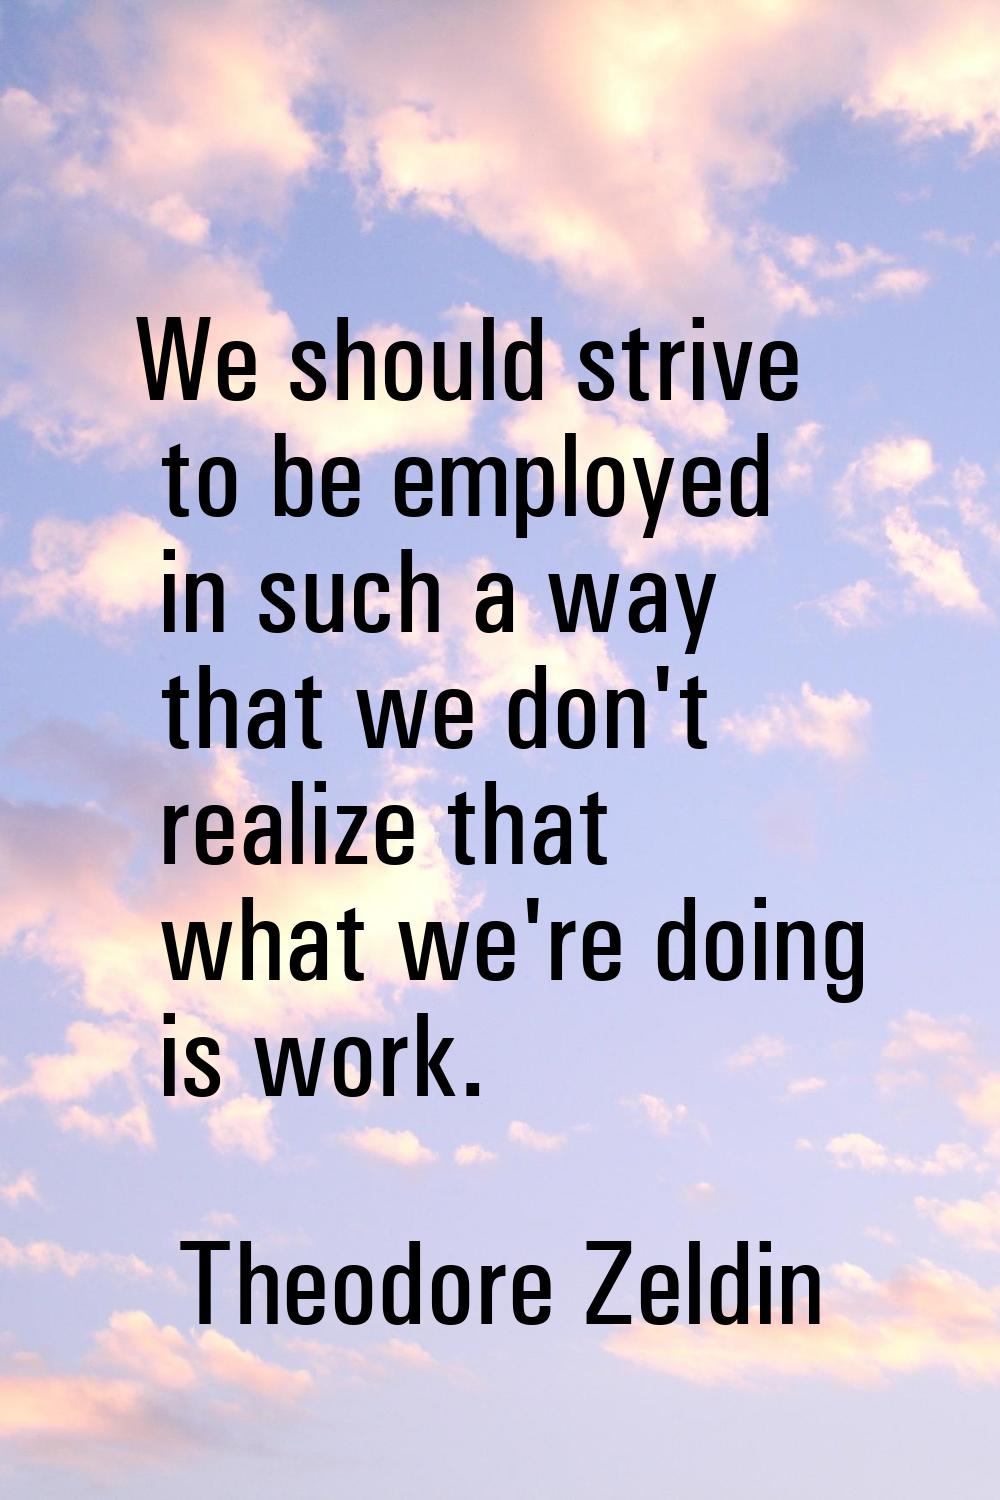 We should strive to be employed in such a way that we don't realize that what we're doing is work.